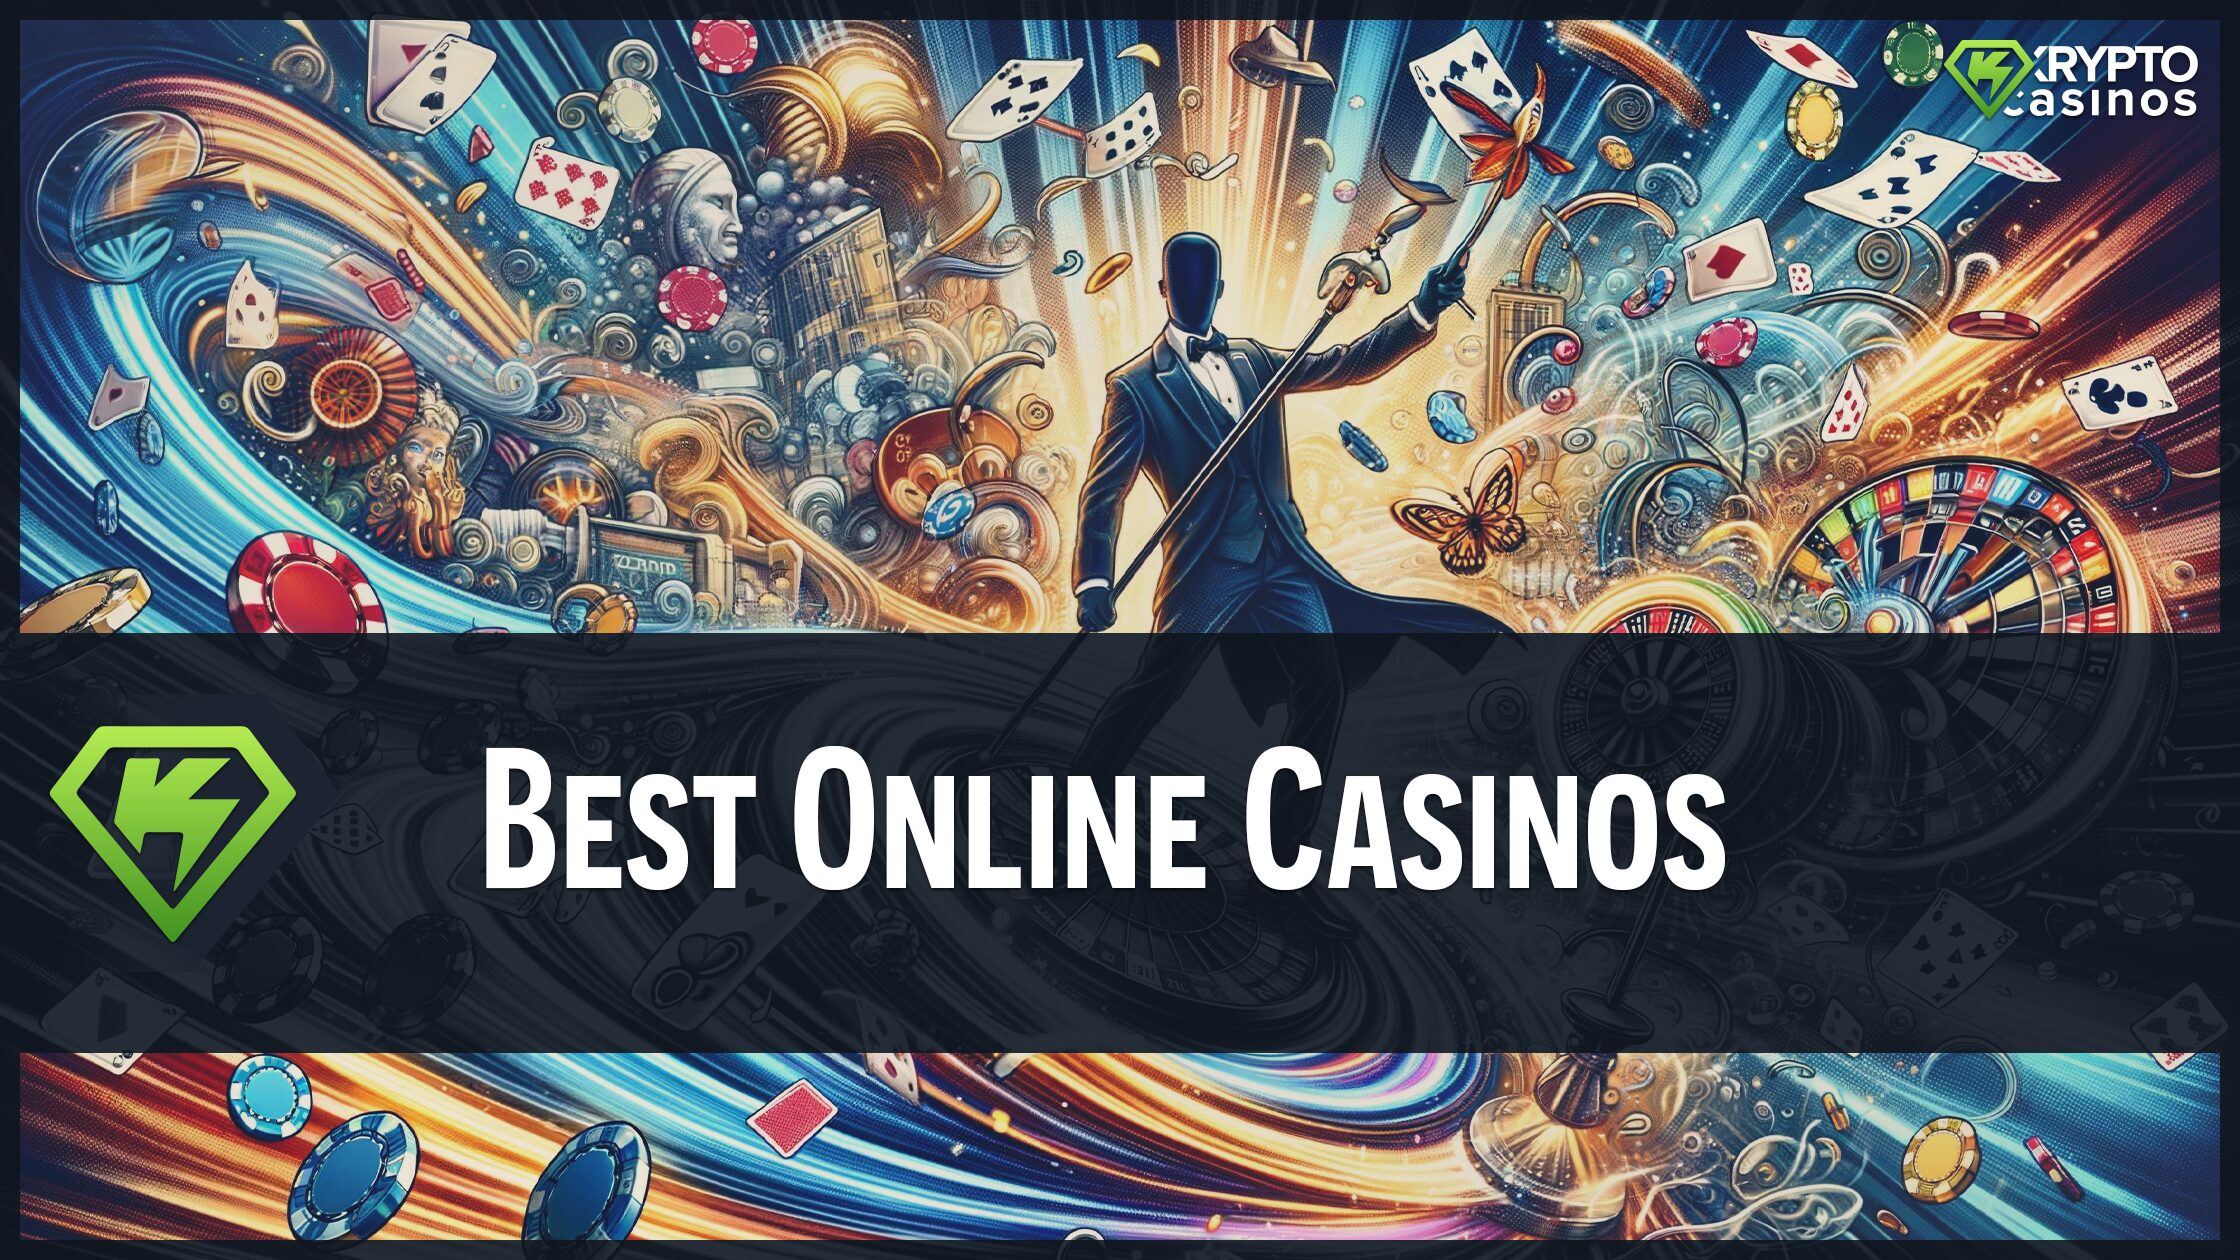 25 Questions You Need To Ask About new online casinos